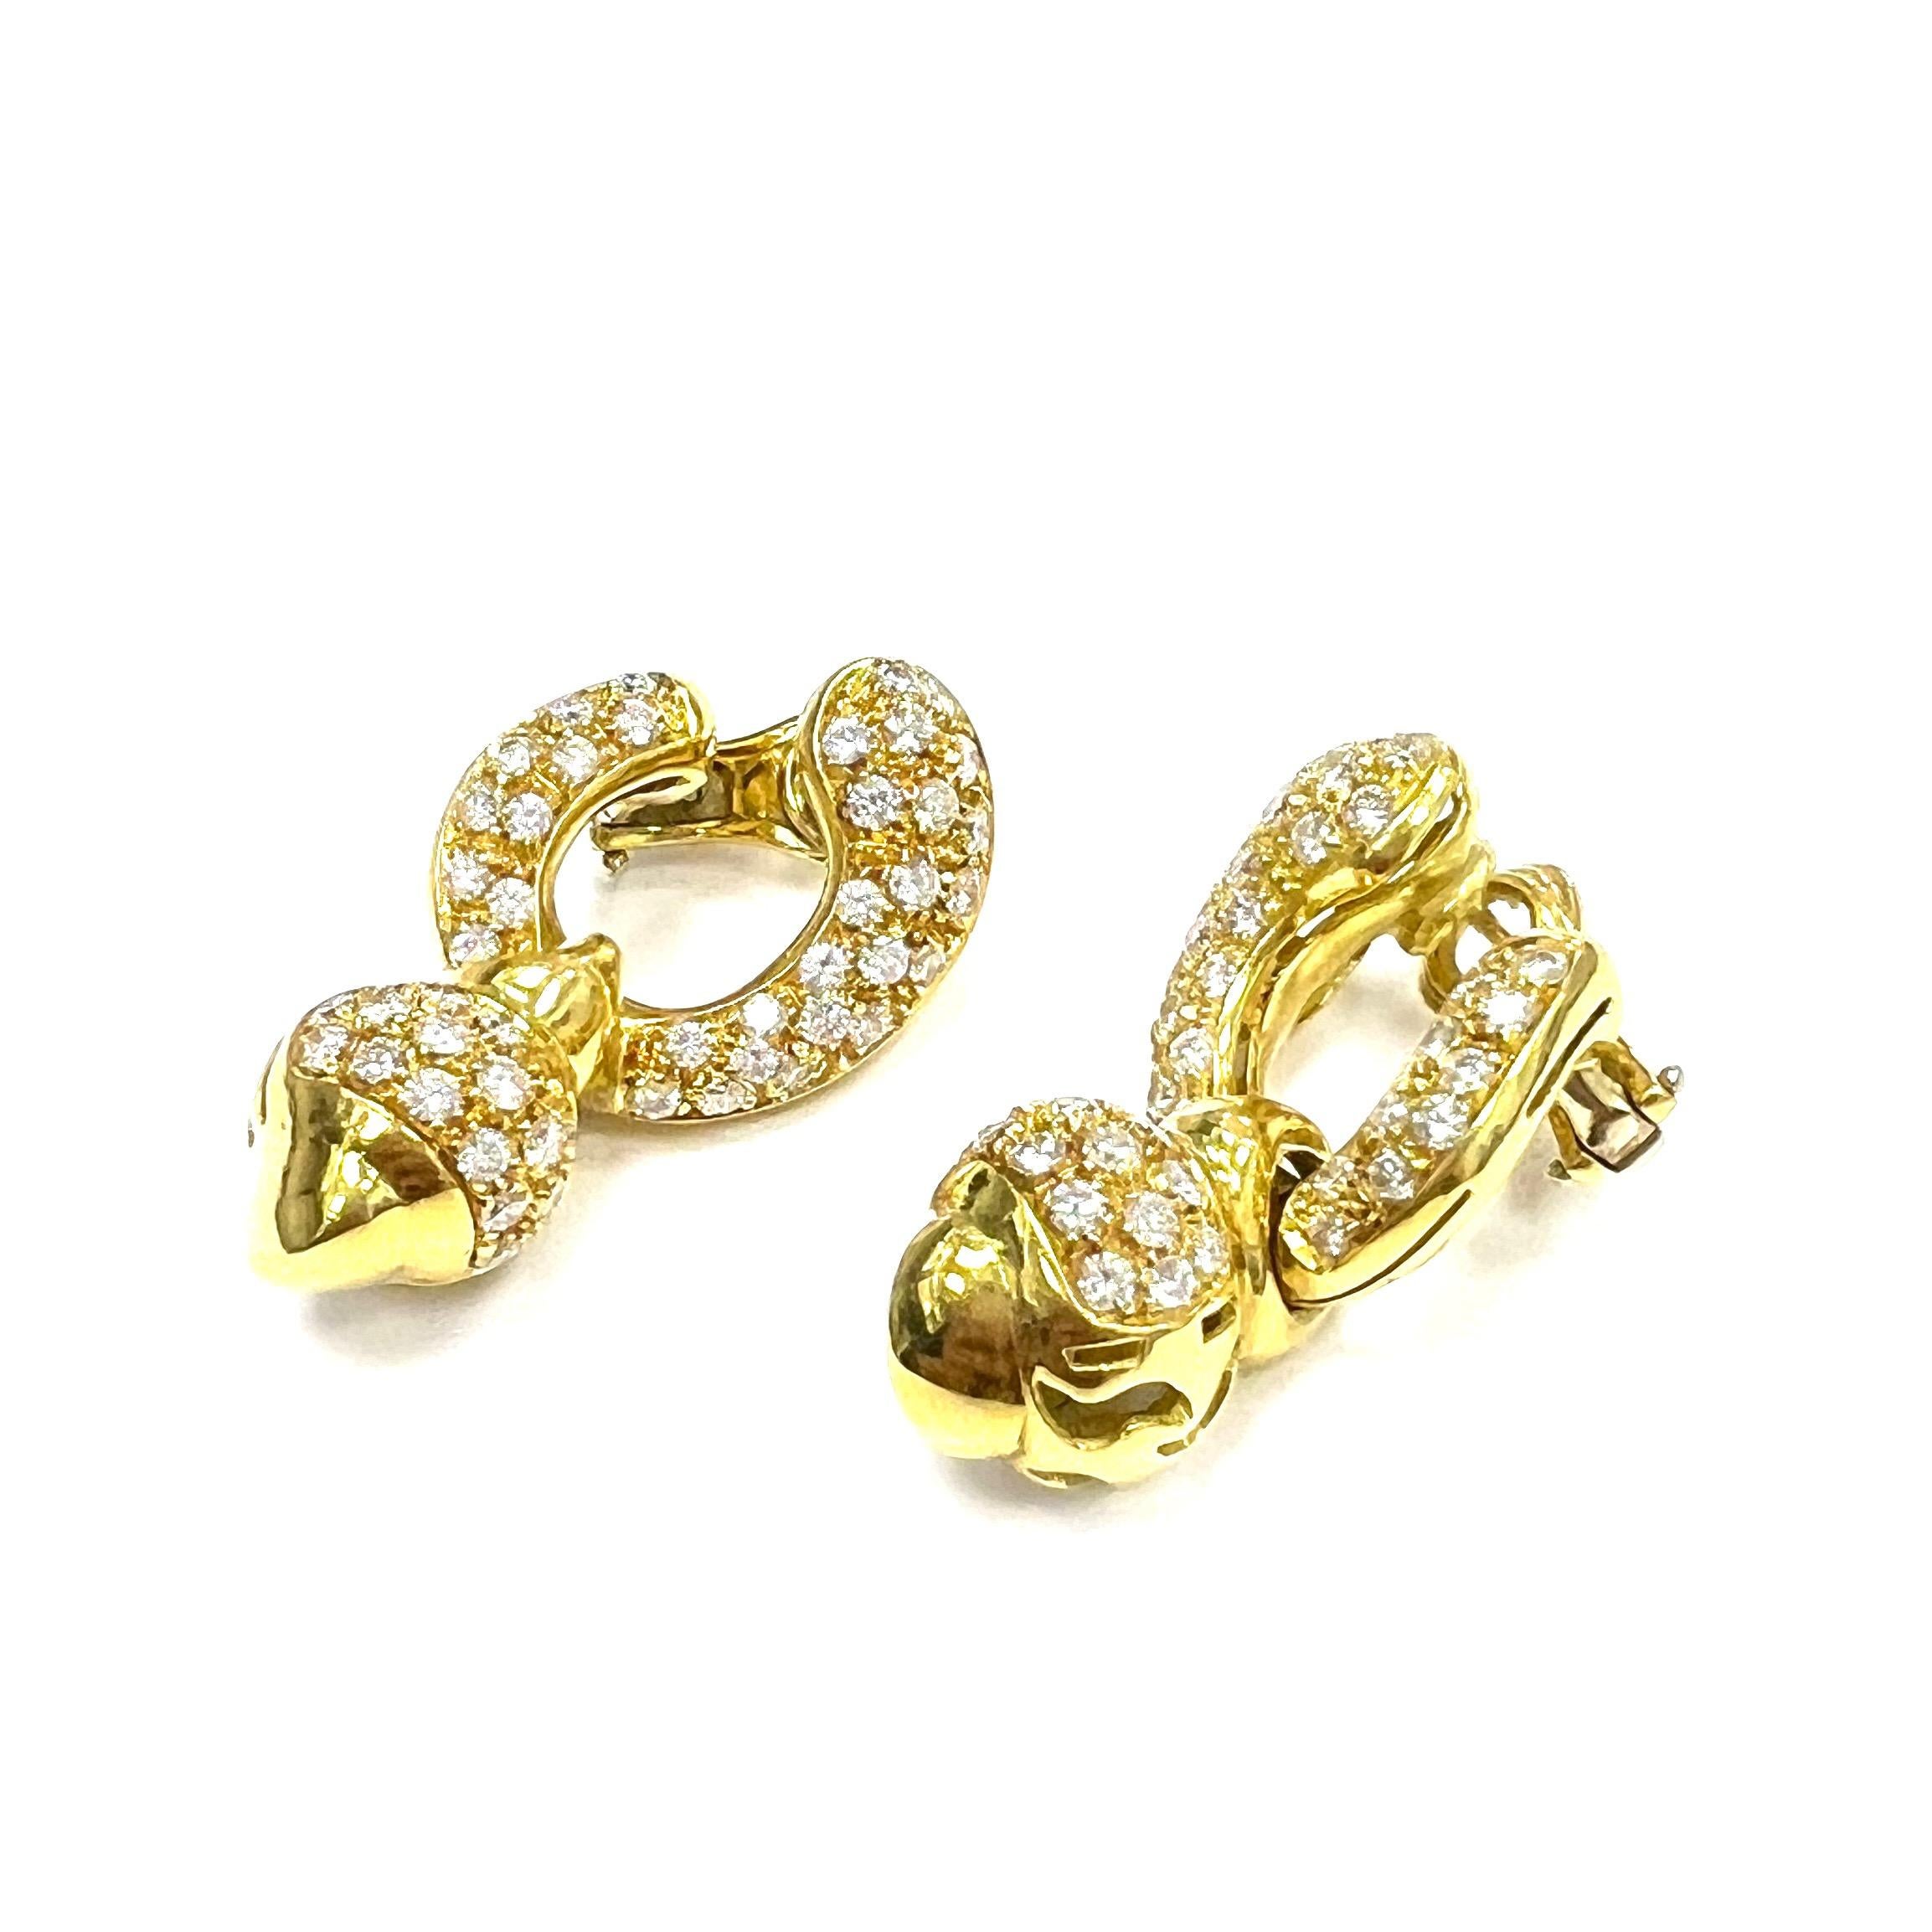 Bvlgari-Styled 18k Diamond Yellow Gold Earrings

Dangling earrings in the style of Bvlgari, featuring one hundred and seven round brilliant cut diamond of approximately 2.68 carats total, with VS1 clarity and H color; set on 18 karat yellow gold;